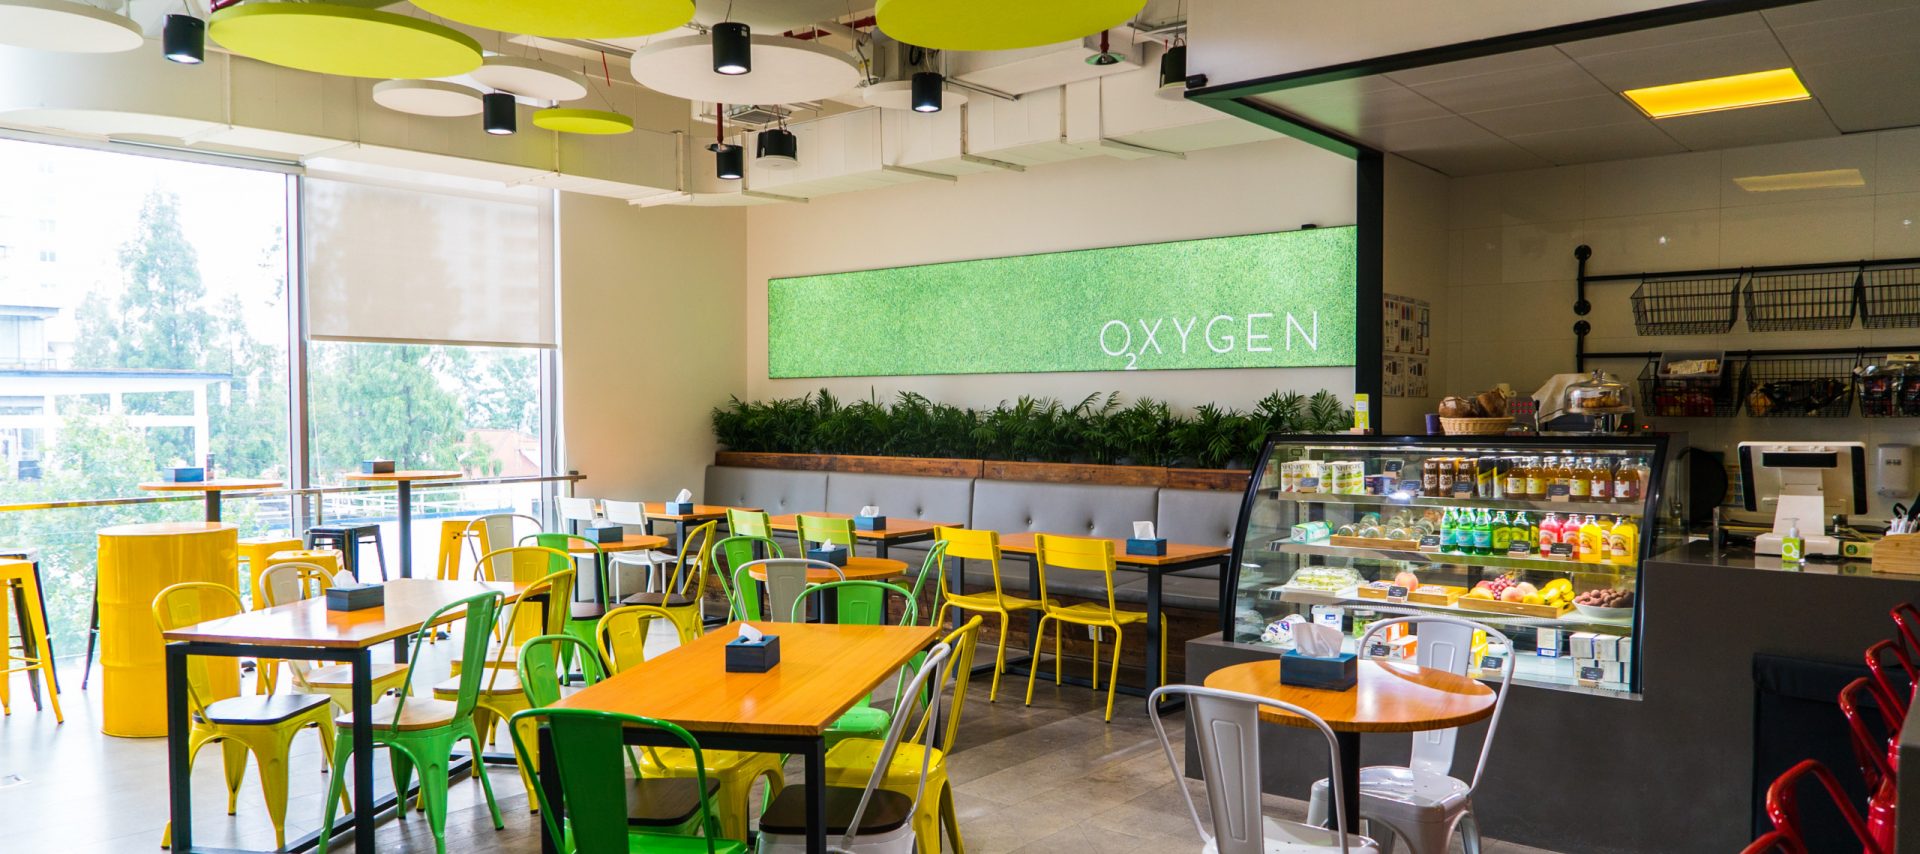 oxygen cafe workspace cafe showcase aden quality of life solutions